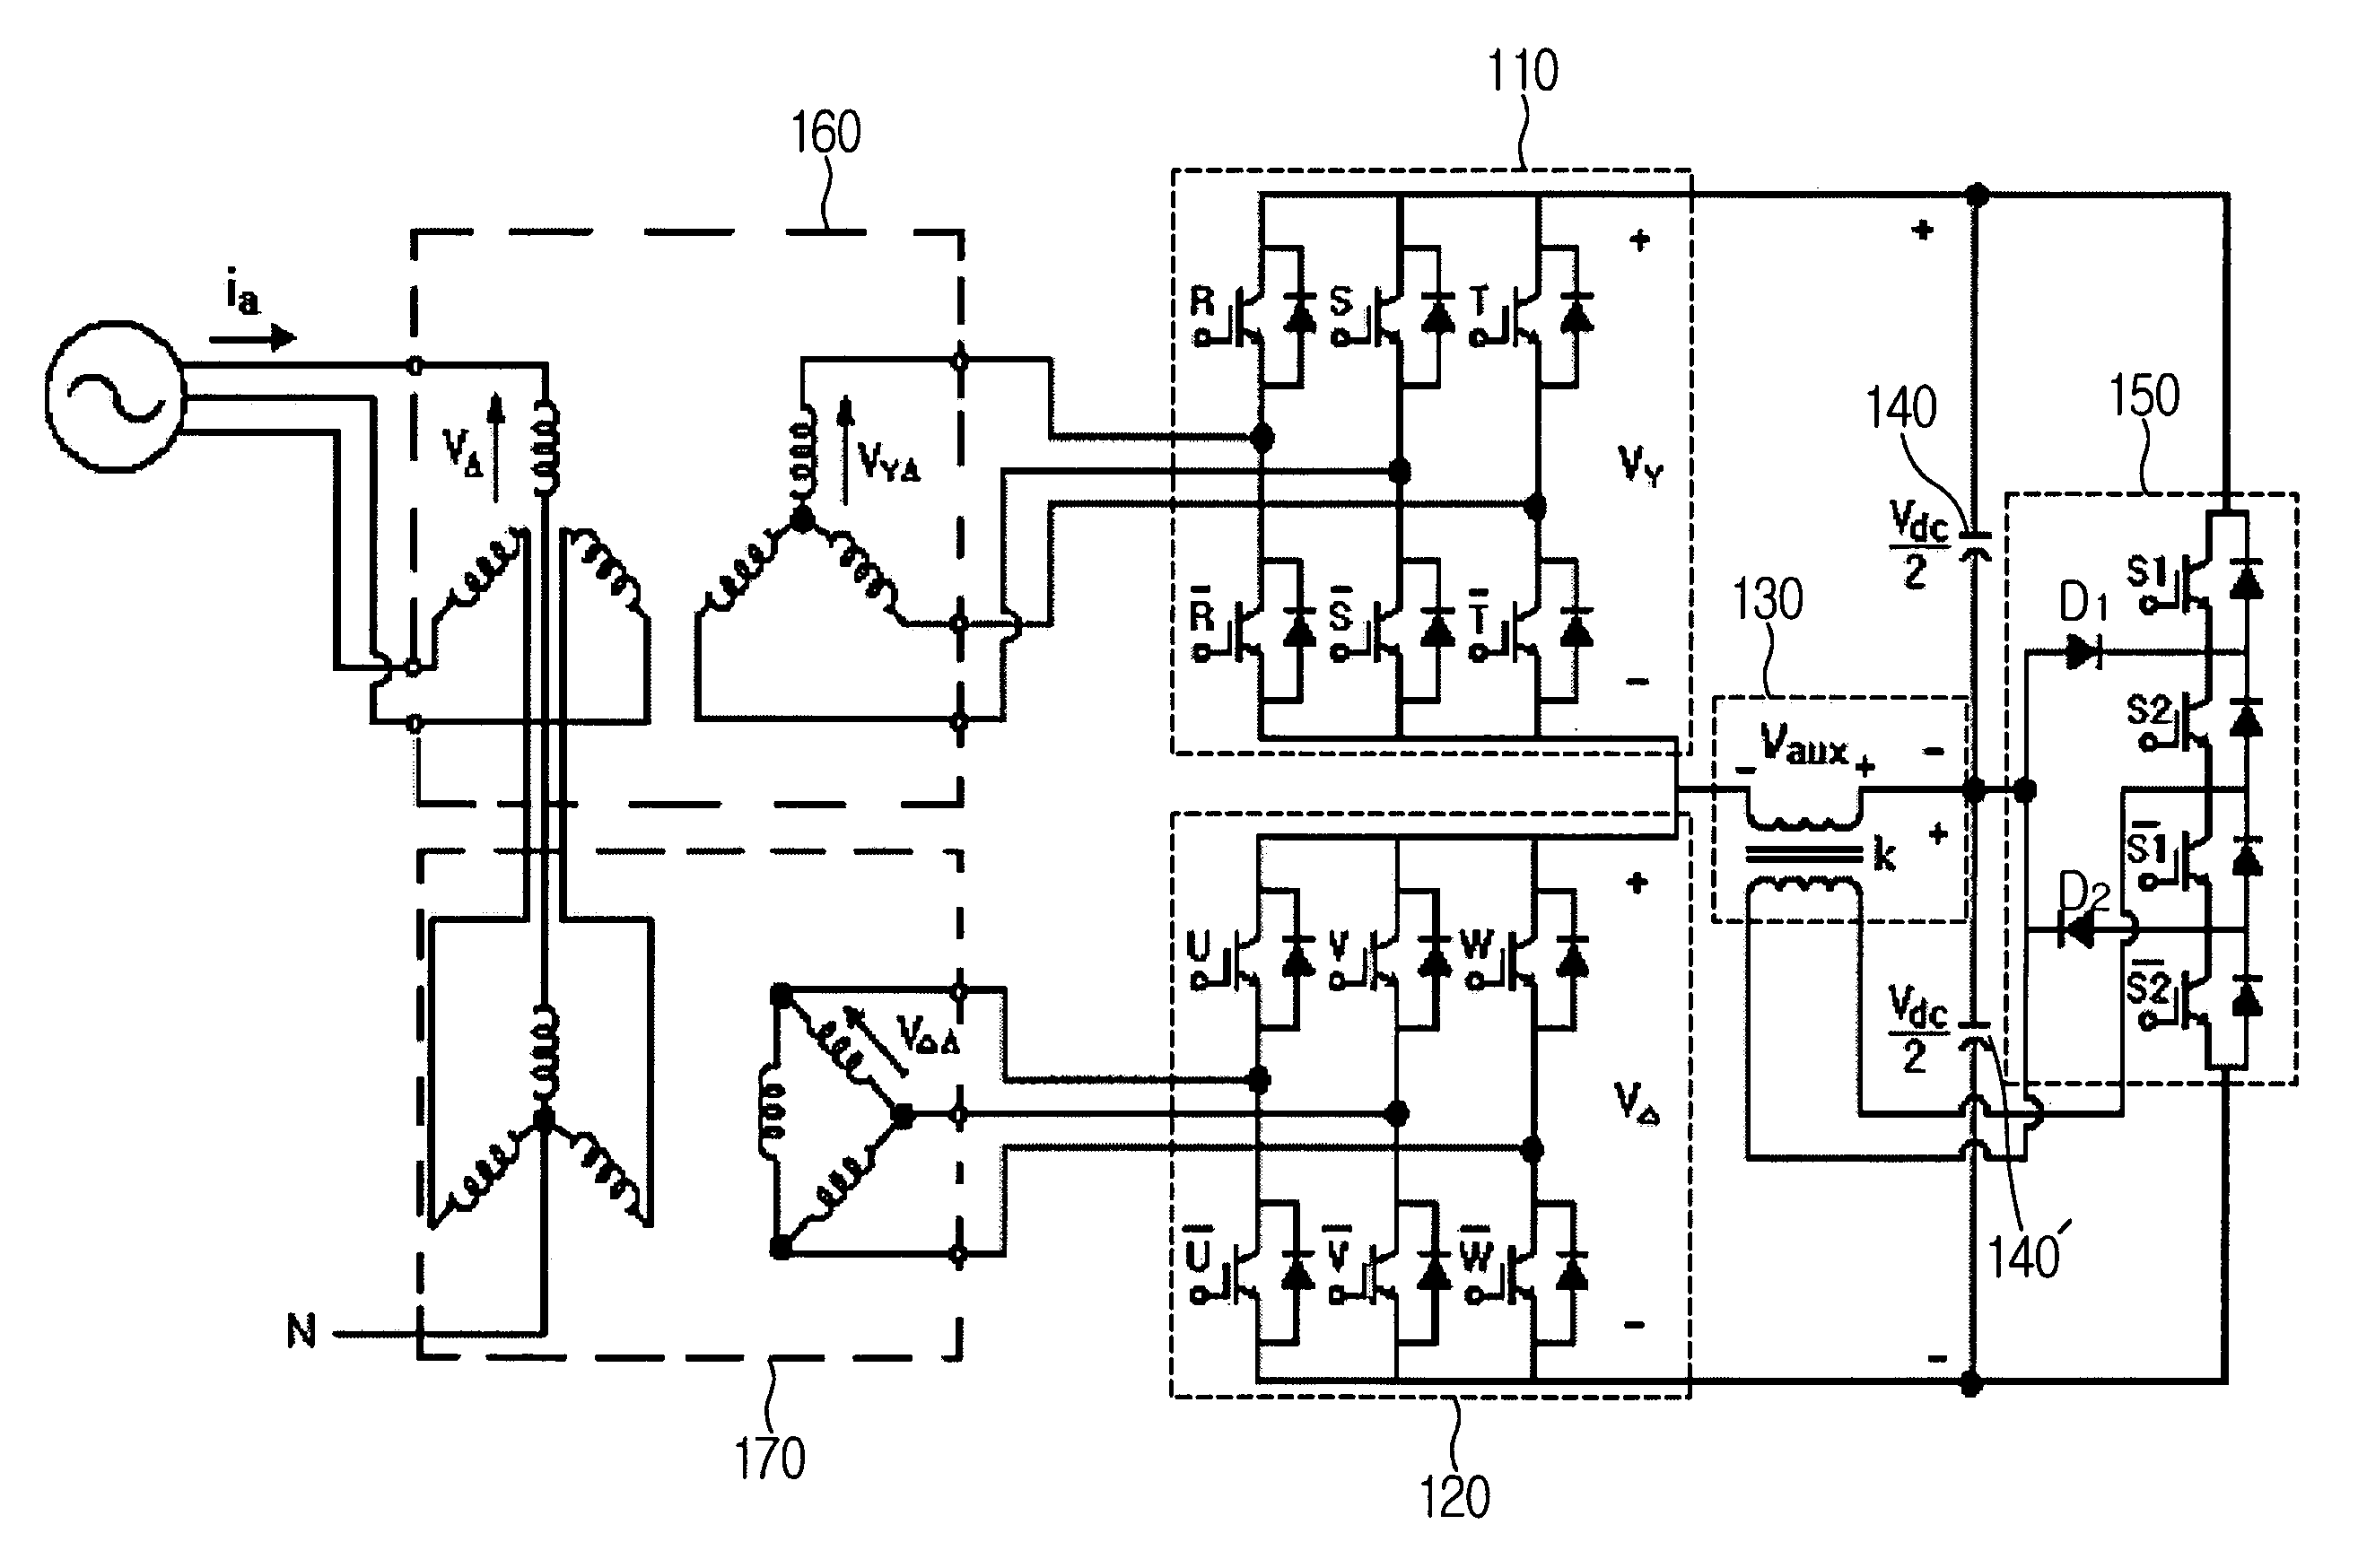 DC power transmission system of voltage source converter using pulse-interleaving auxiliary circuit